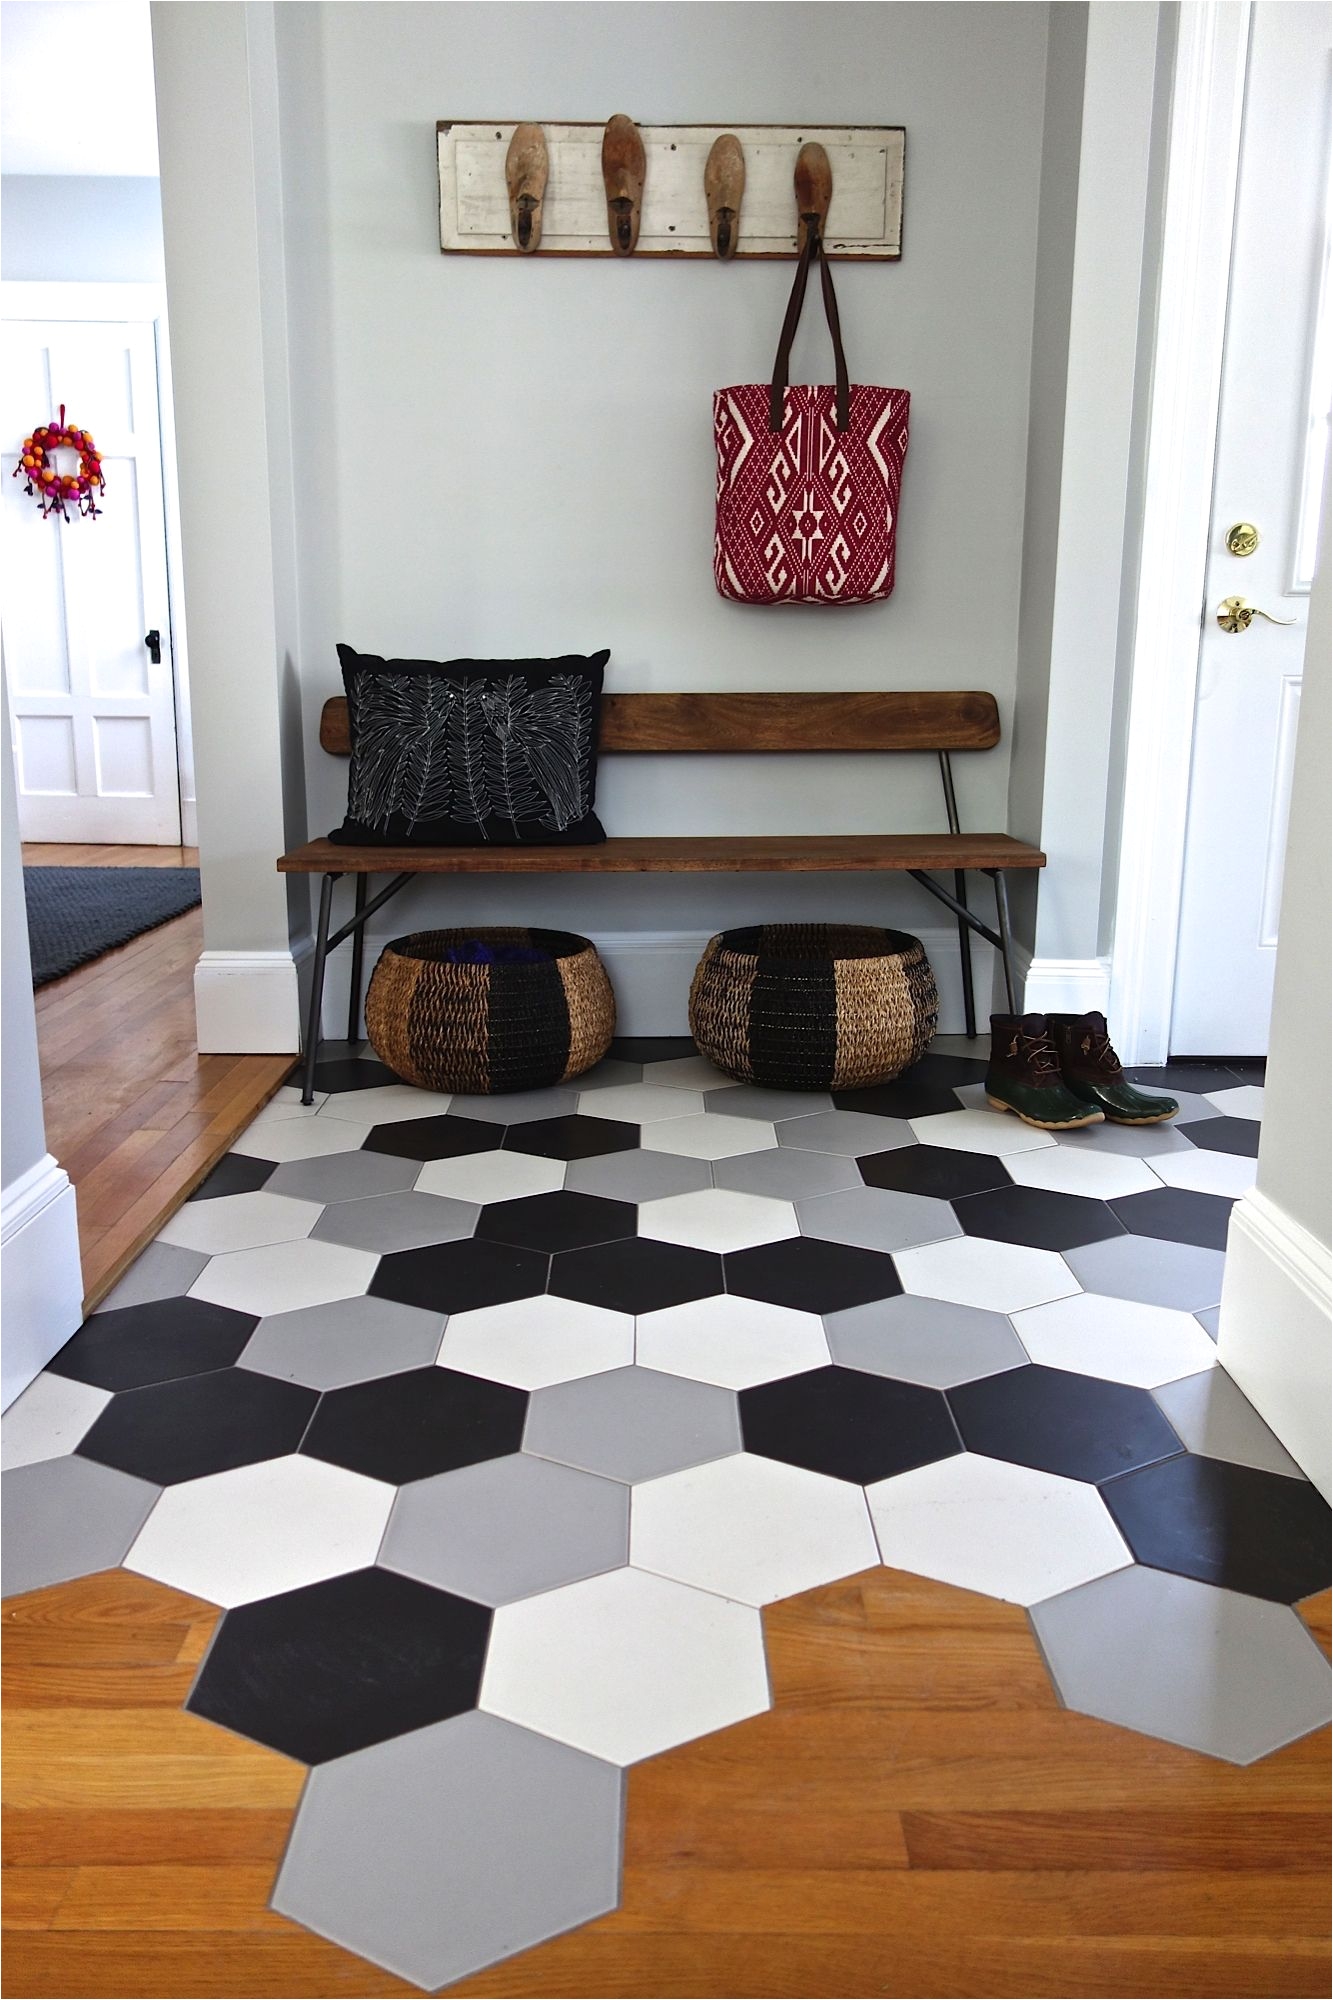 hex tile mudroom with transition to wood floor kitchen loving the ann sacks tiles and cb2 bench